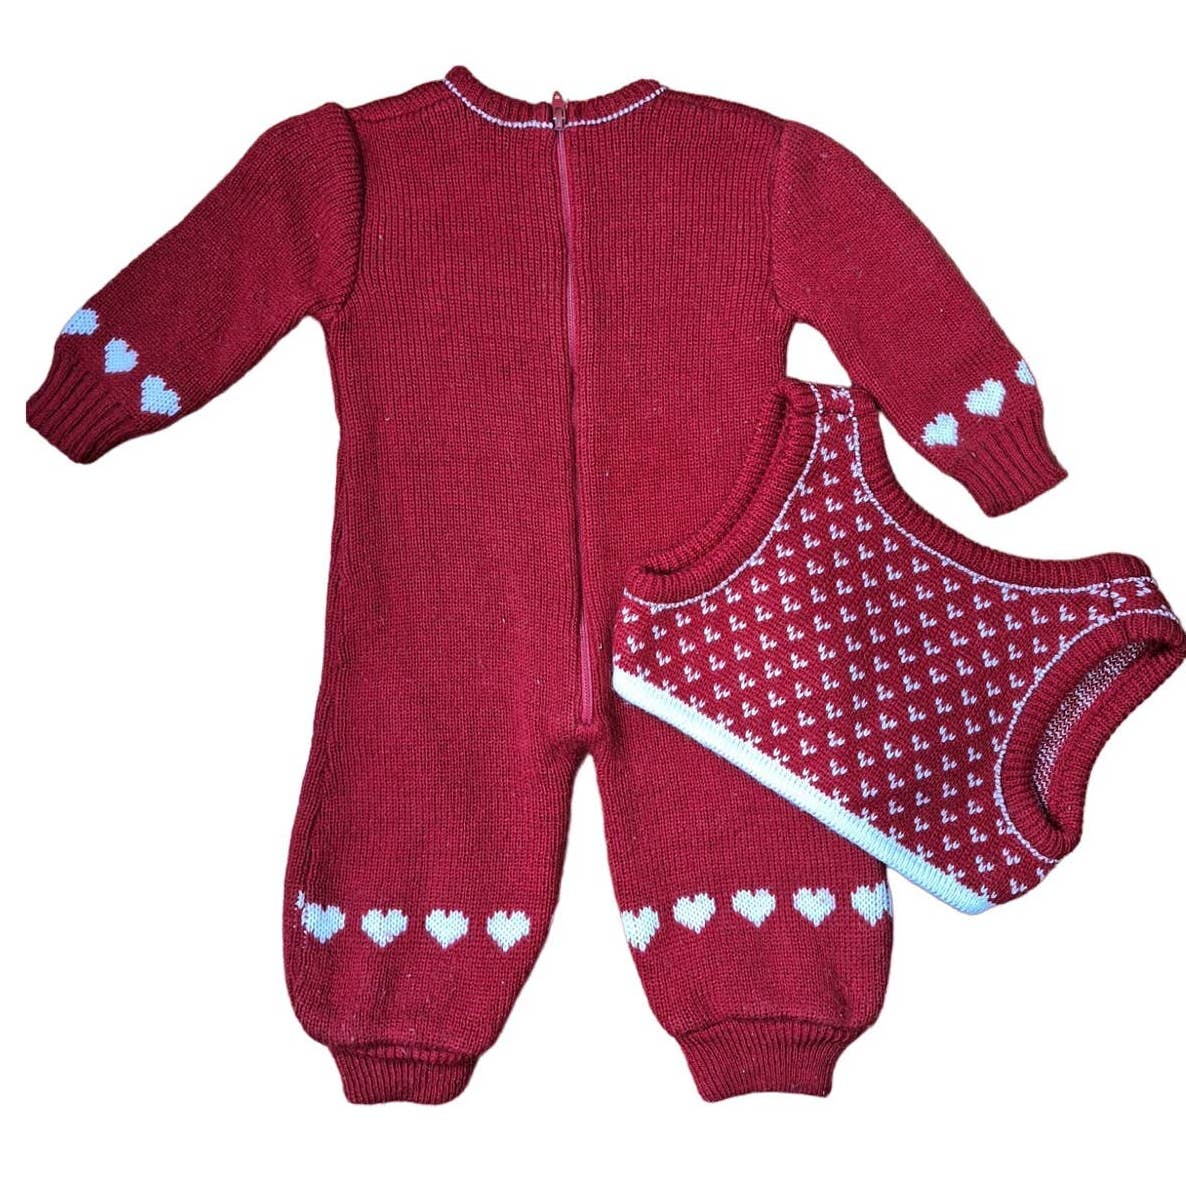 Vintage 80s Red Heart Sweater Onsie With Vest Size 6 Months - themallvintage The Mall Vintage